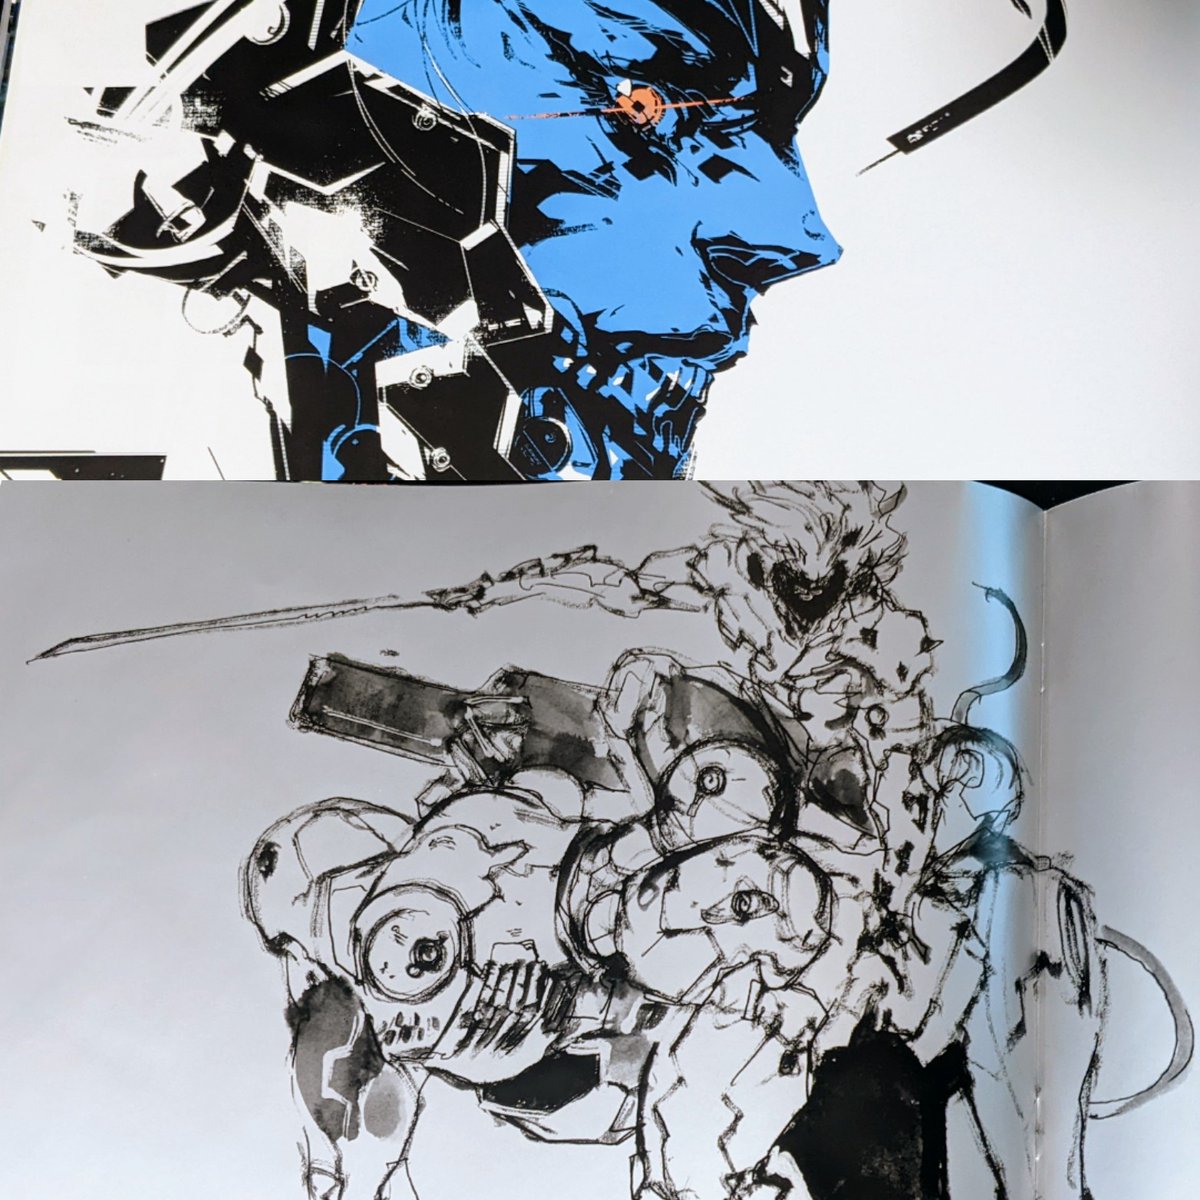 Some pages from the little art book I got for preordering the game way back when. Love love love Shinkawa's work. I feel like some of these were concepts for the game when it was still about the Area 51 stuff 
Also the Revo Raiden. What a shame we never got a Wolf to go with him 